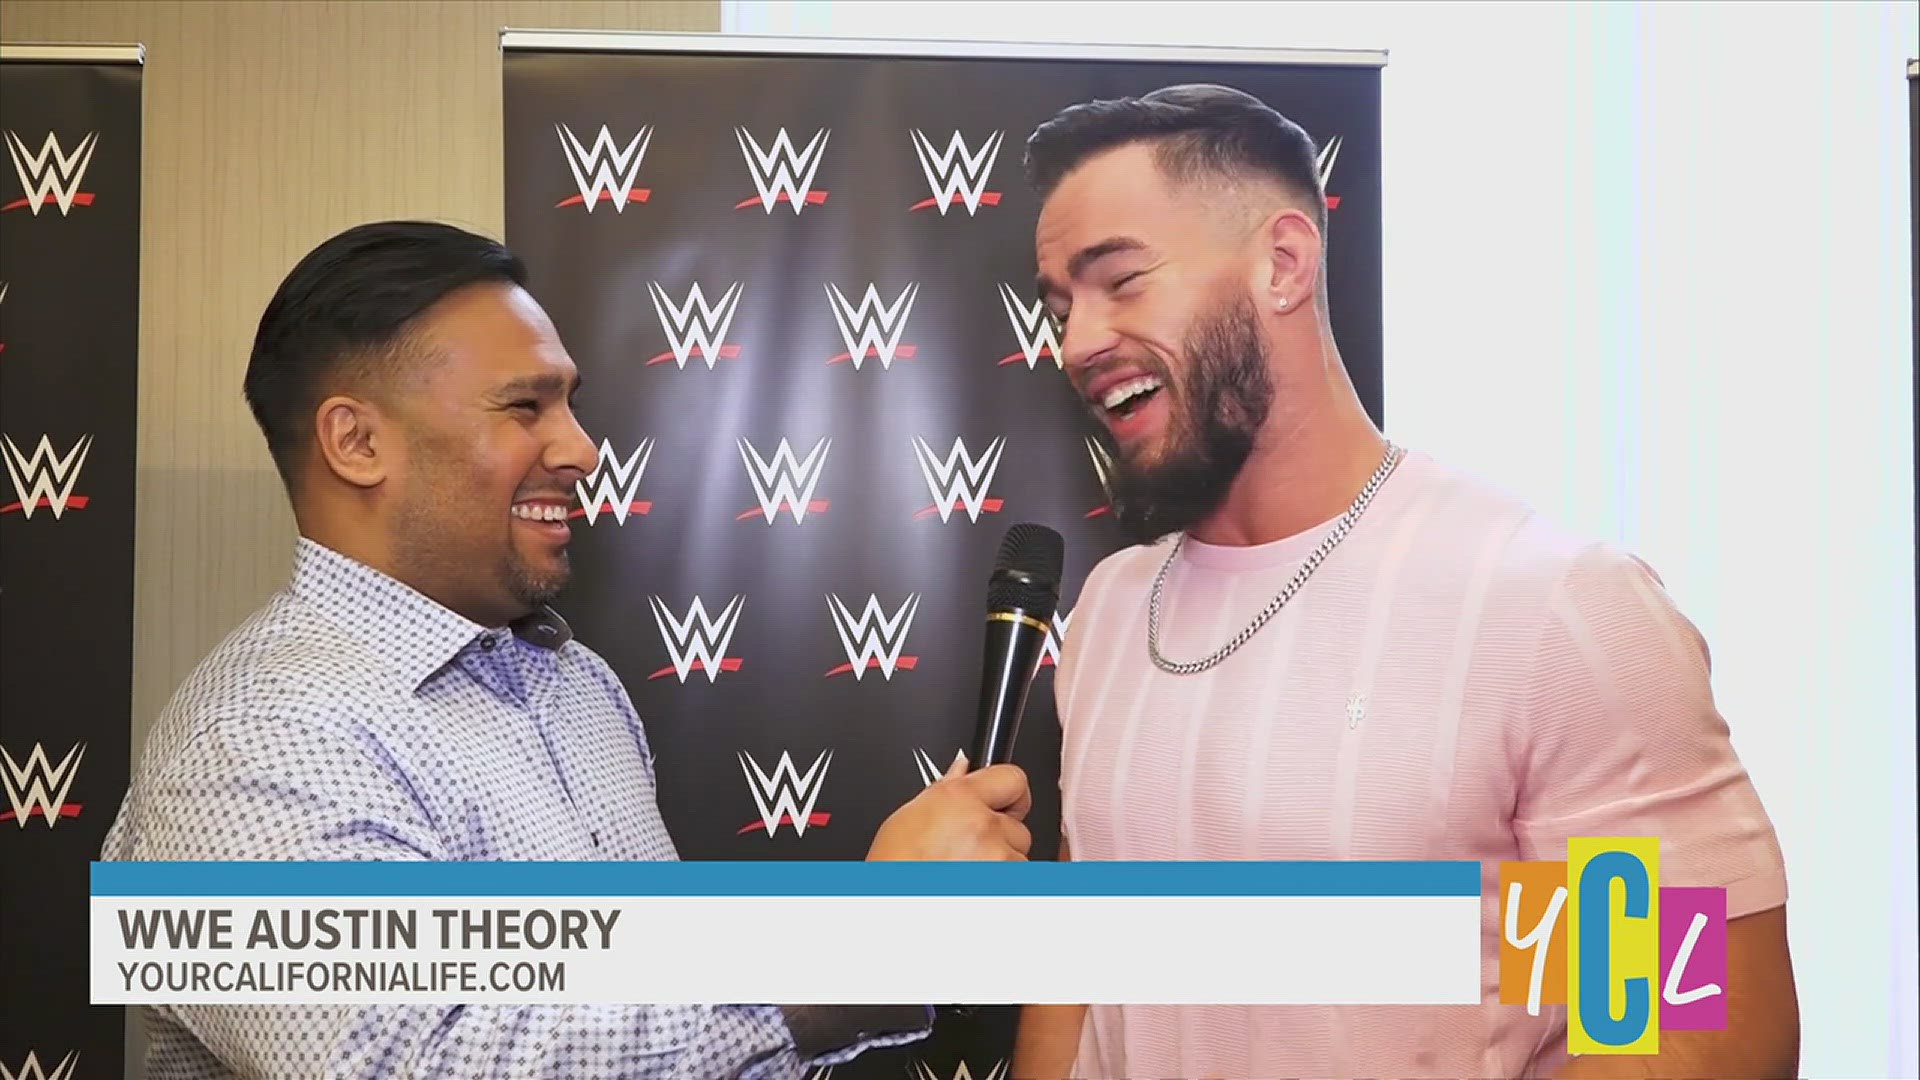 ABC10's Julian Soto interviewed WWE Wrestler, Austin Theory about his road to Wrestlemania and his upcoming fight against John Cena.